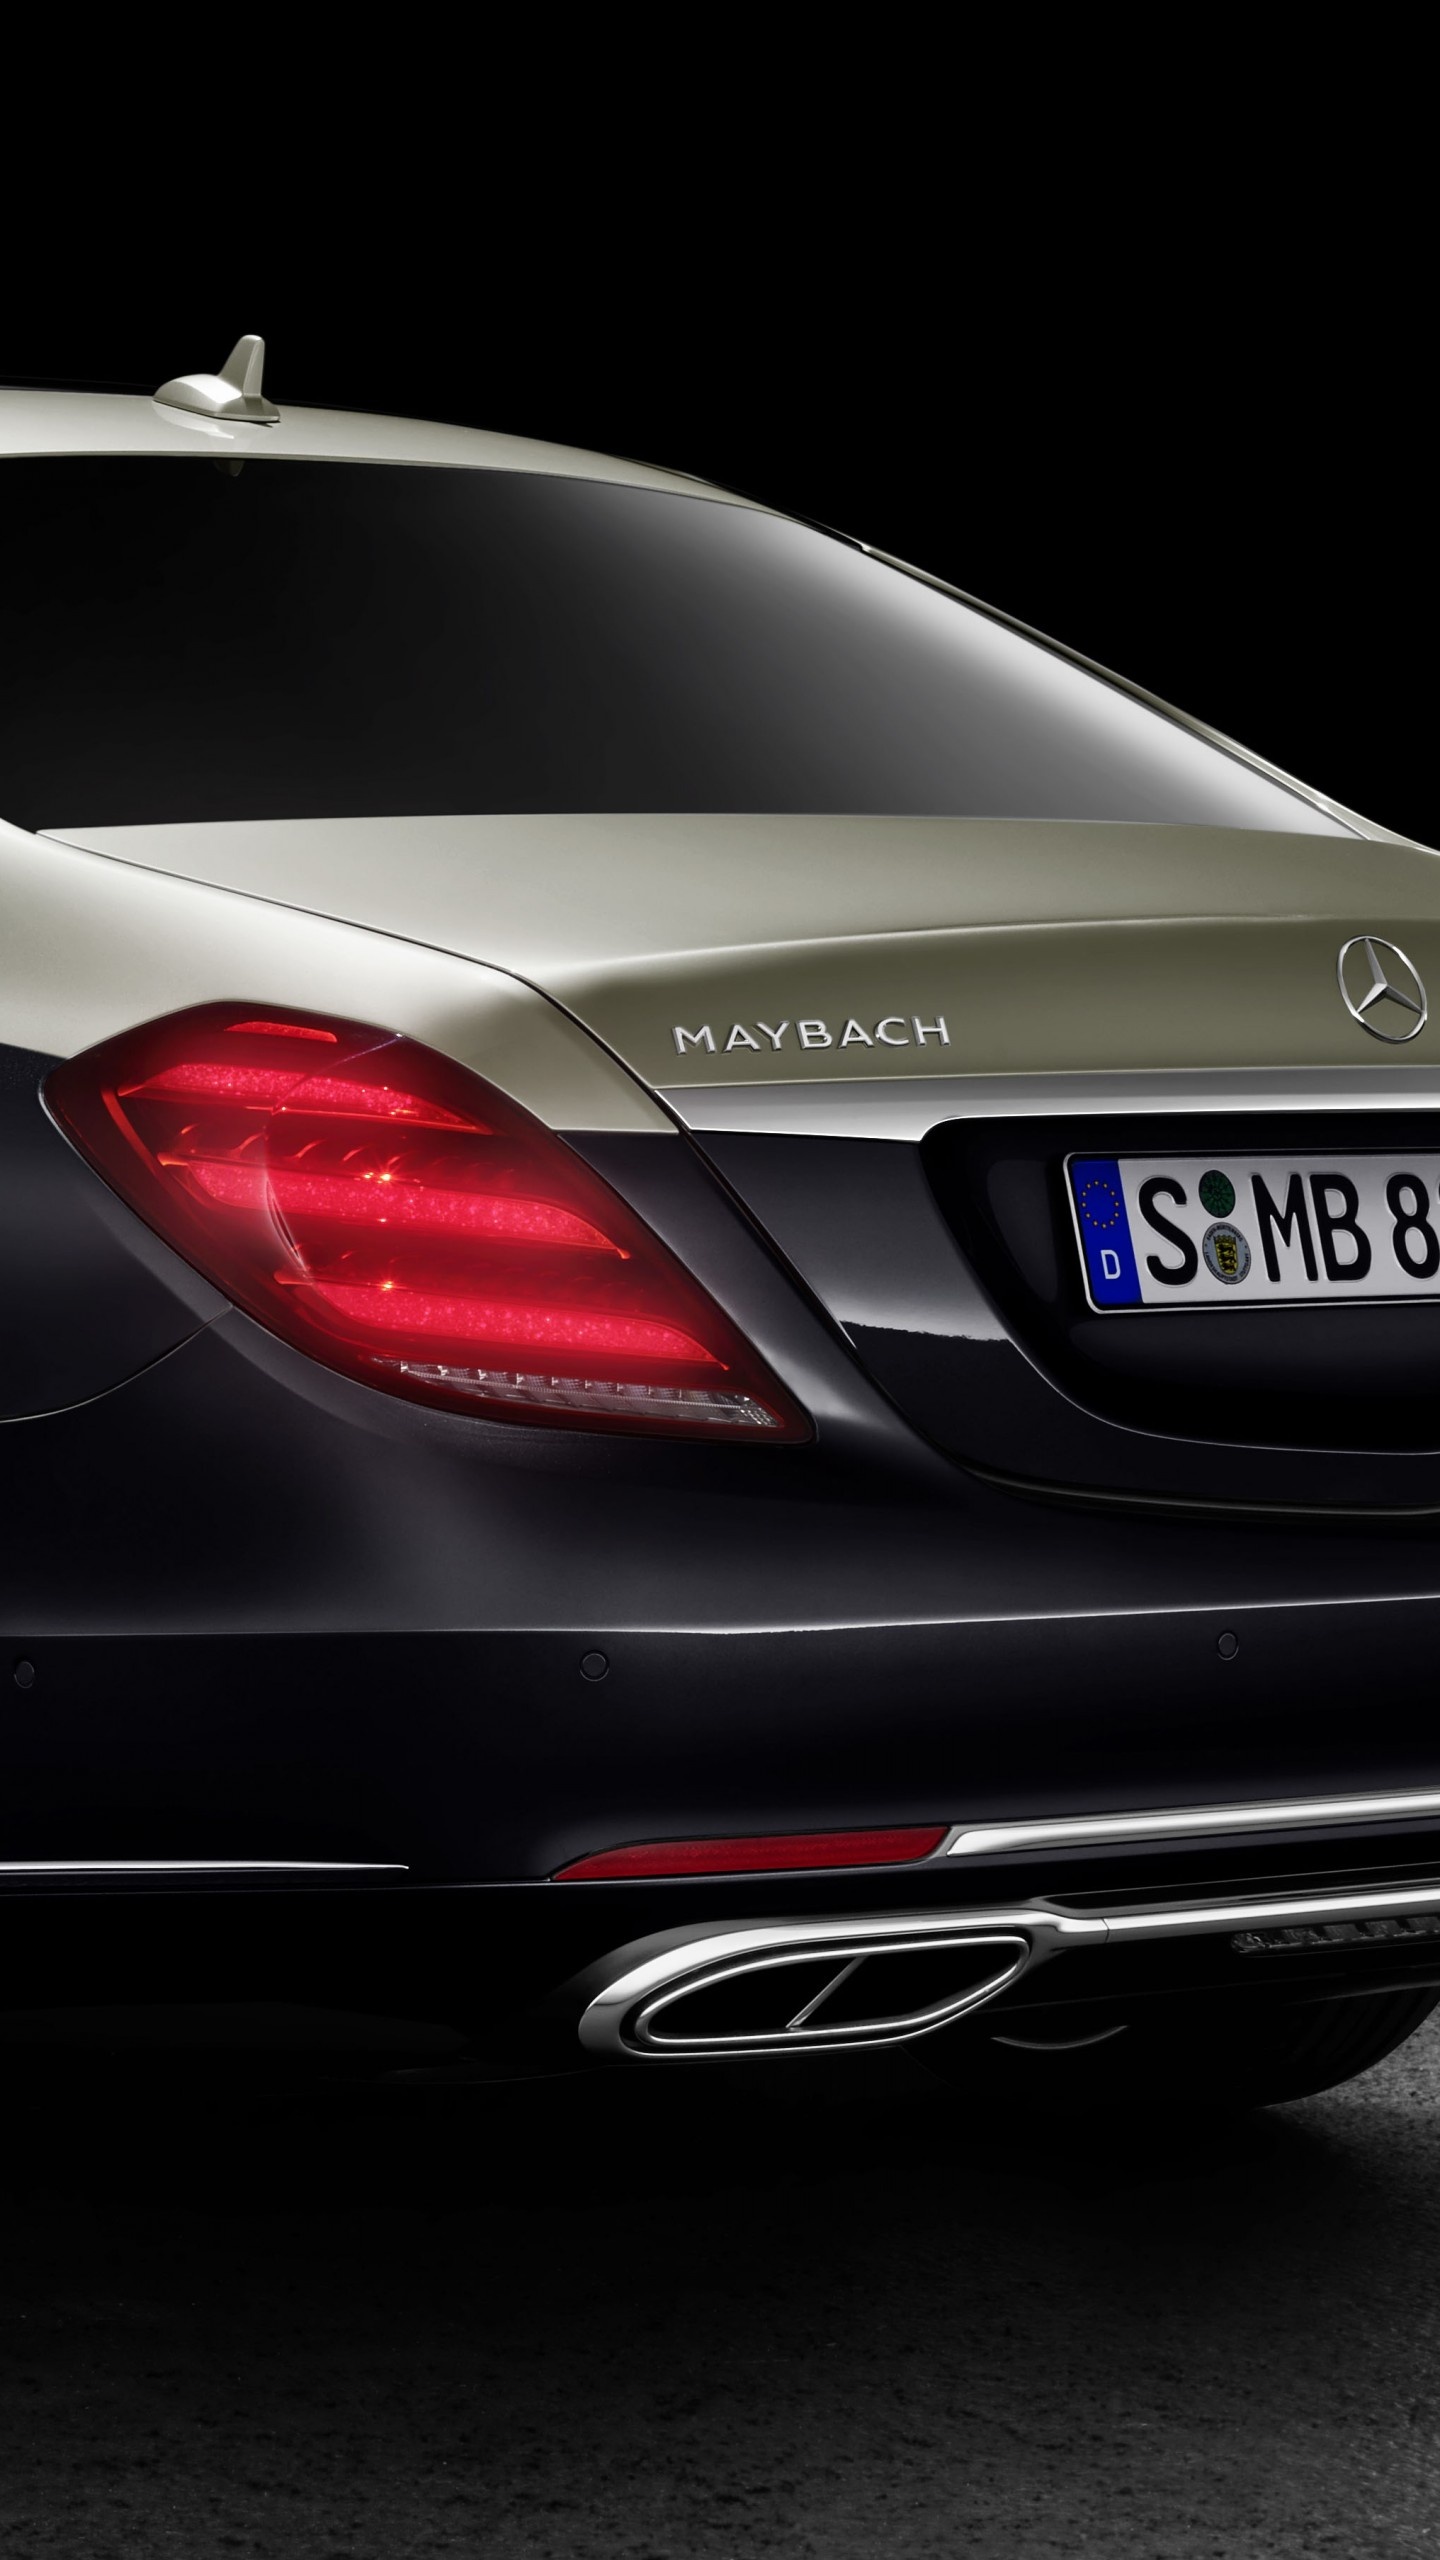 Mercedes-Benz Maybach S600, Classy wallpaper, Exquisite luxury, High-end vehicle, 1440x2560 HD Phone